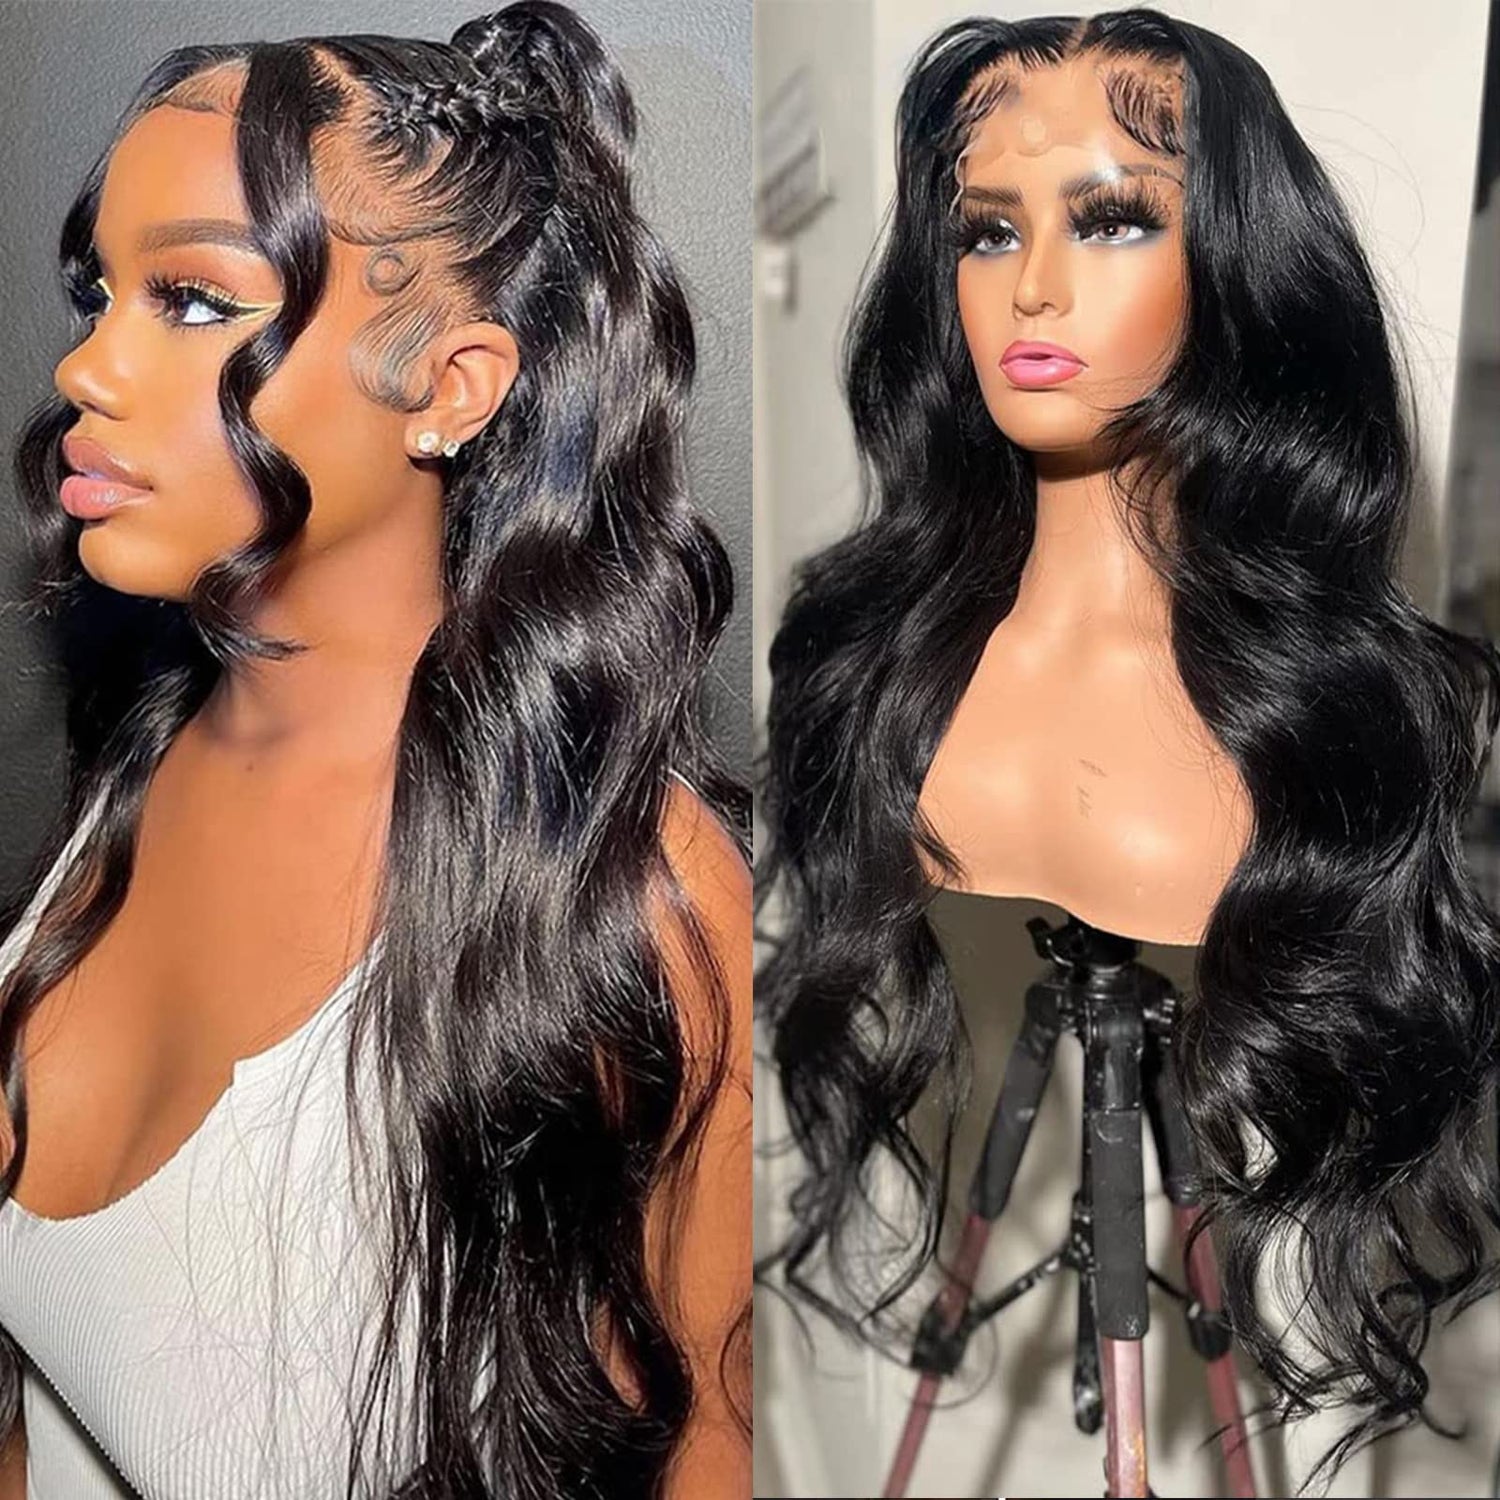 40&quot; Extra Long Length Hair 13x4 Lace Front Wig - Natural Black Straight Hair and Body Wave Human Hair Wigs